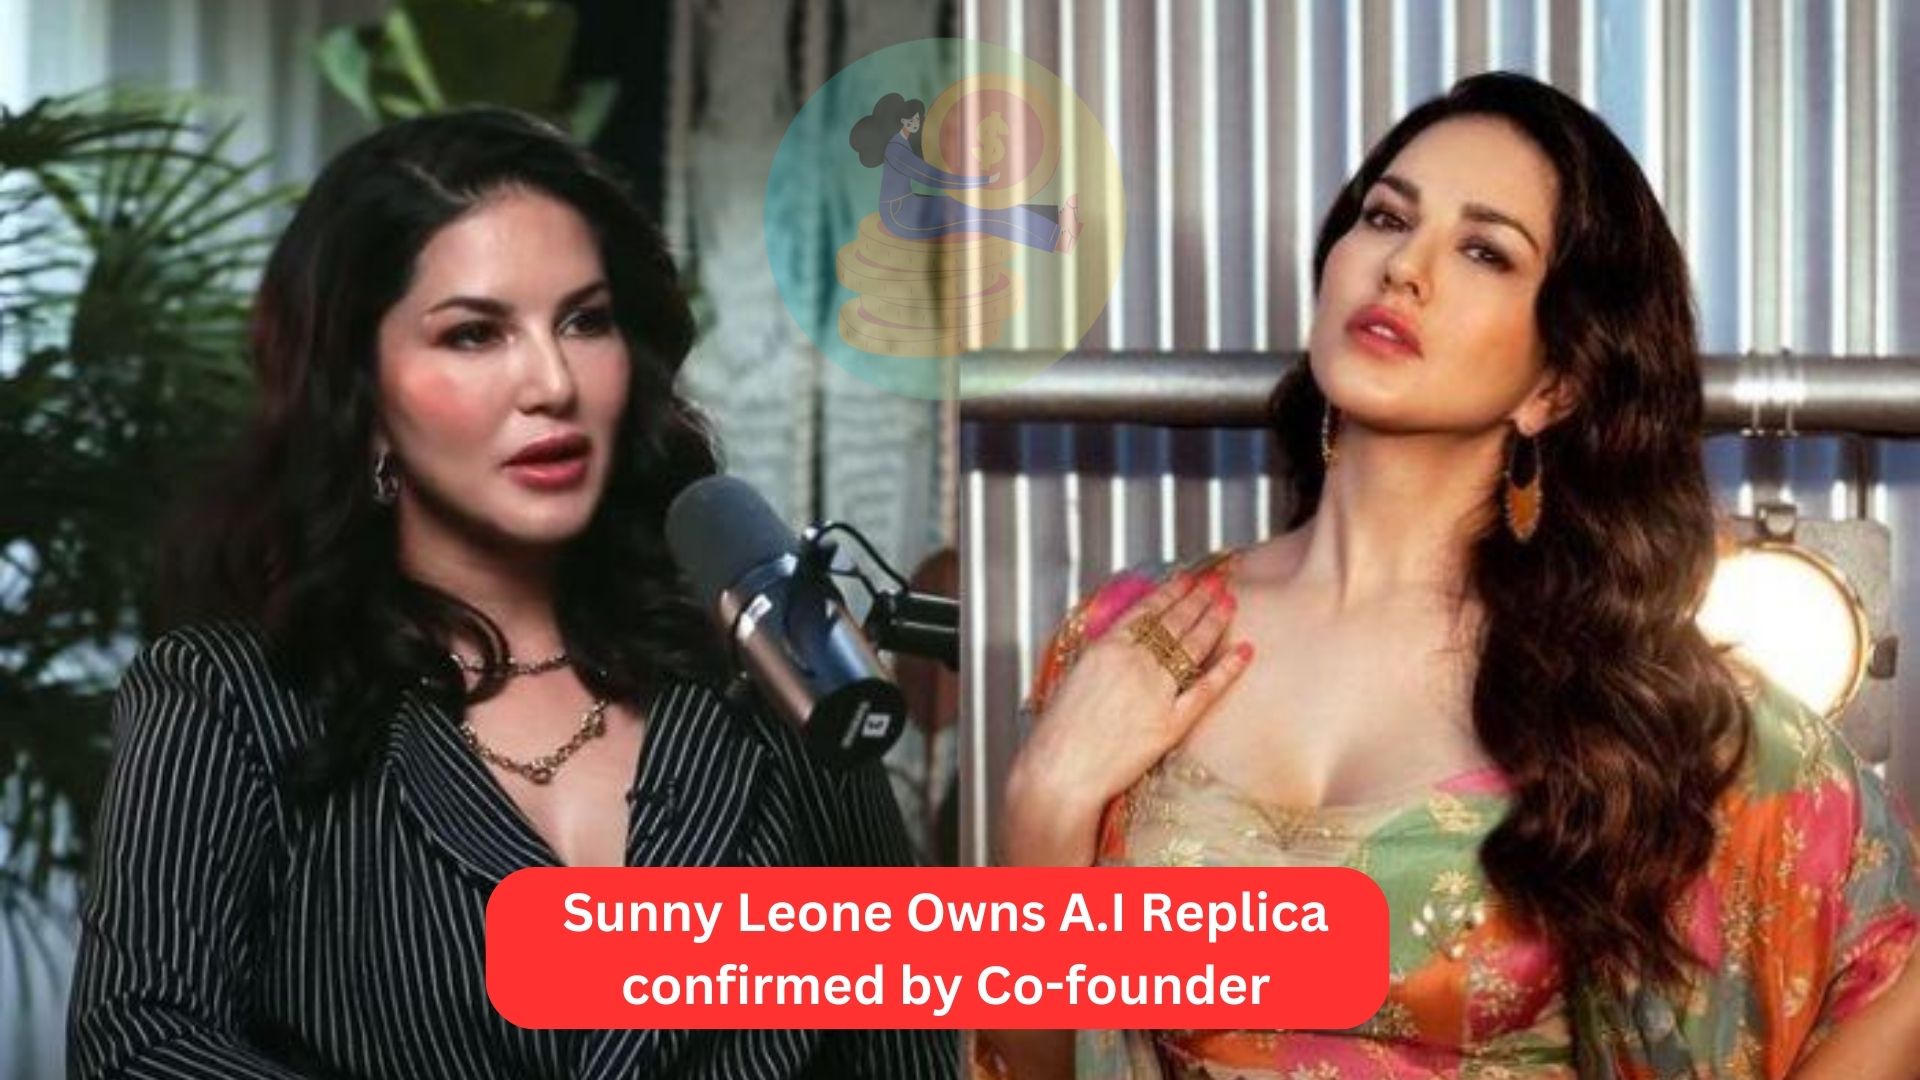 Sunny Leone Owns A.I Replica confirmed by Co-founder 